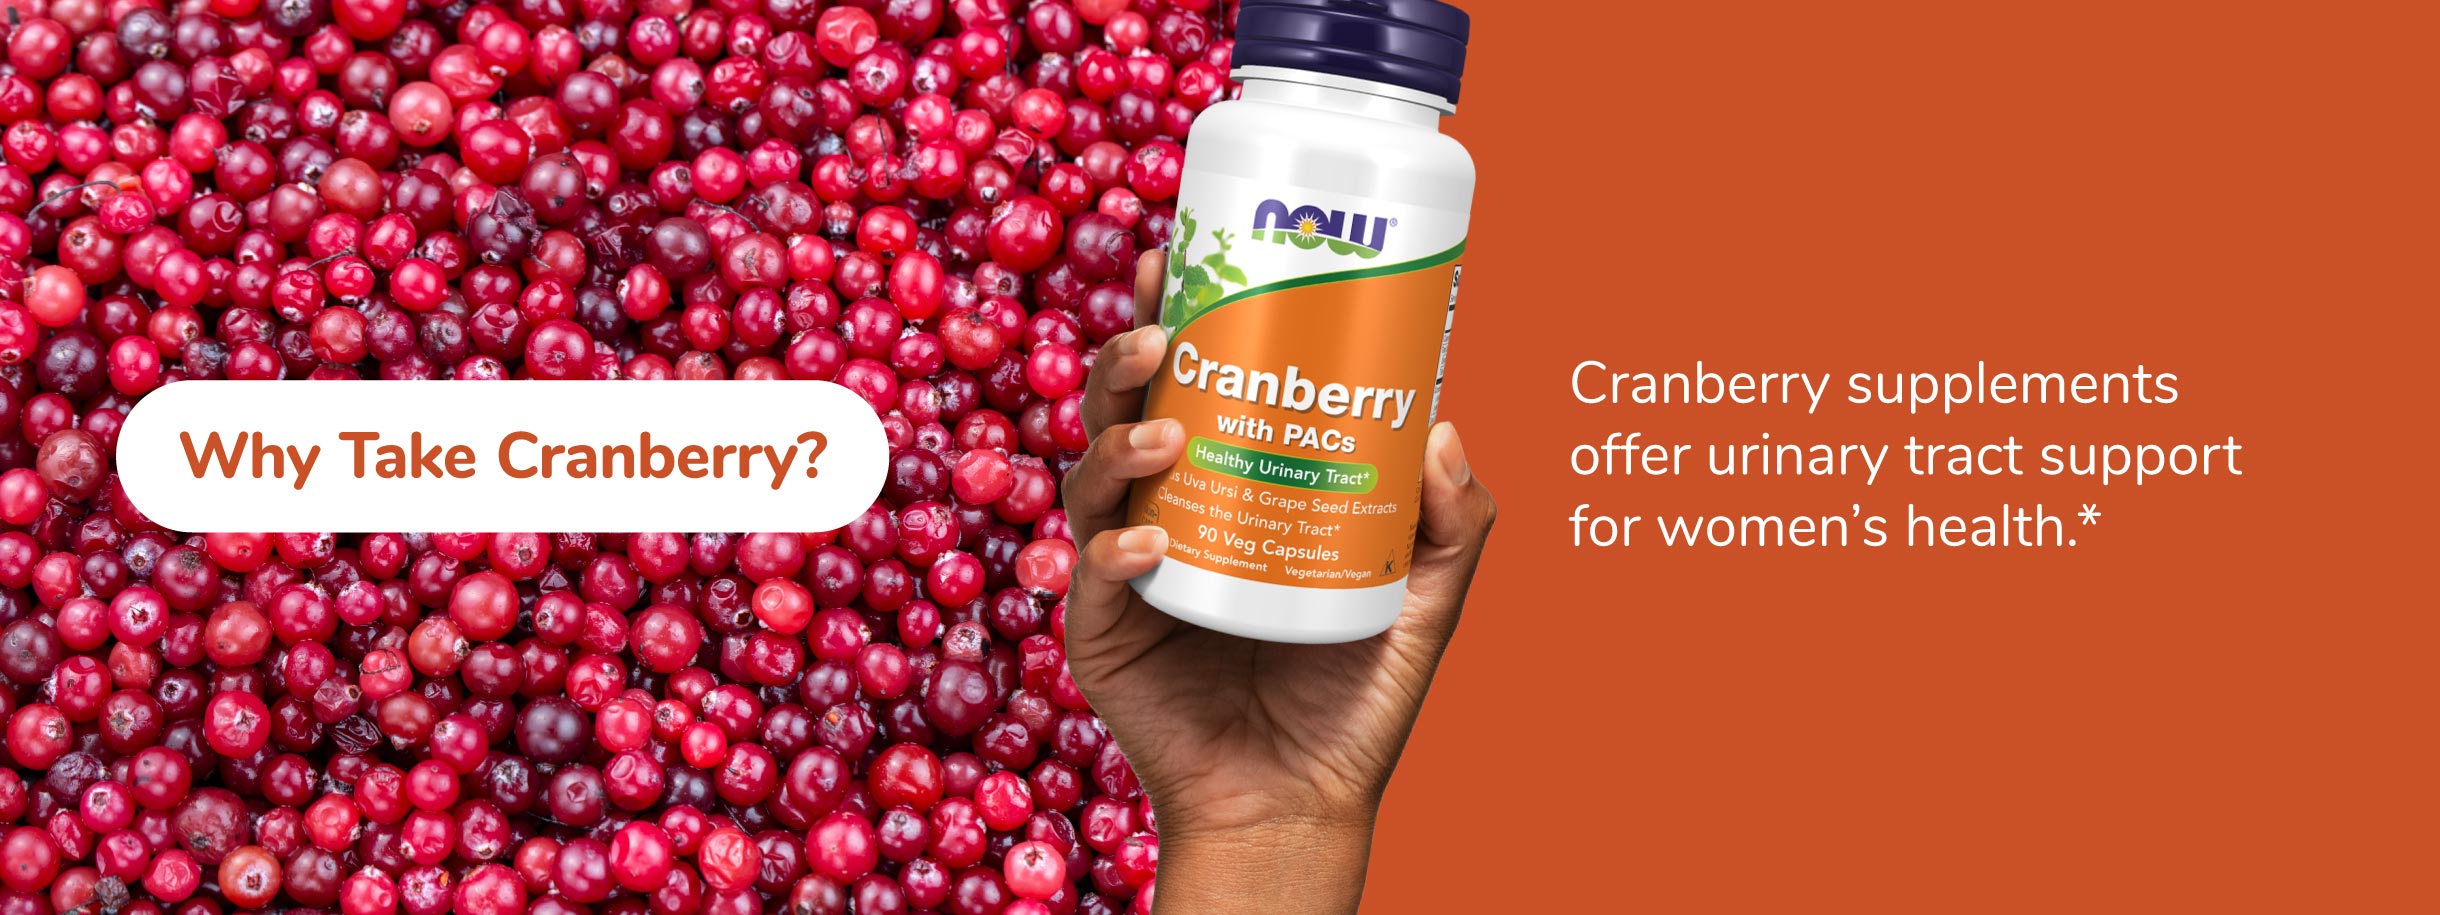 Why Take Cranberry? Cranberry supplements offer urinary tract support for women’s health.*